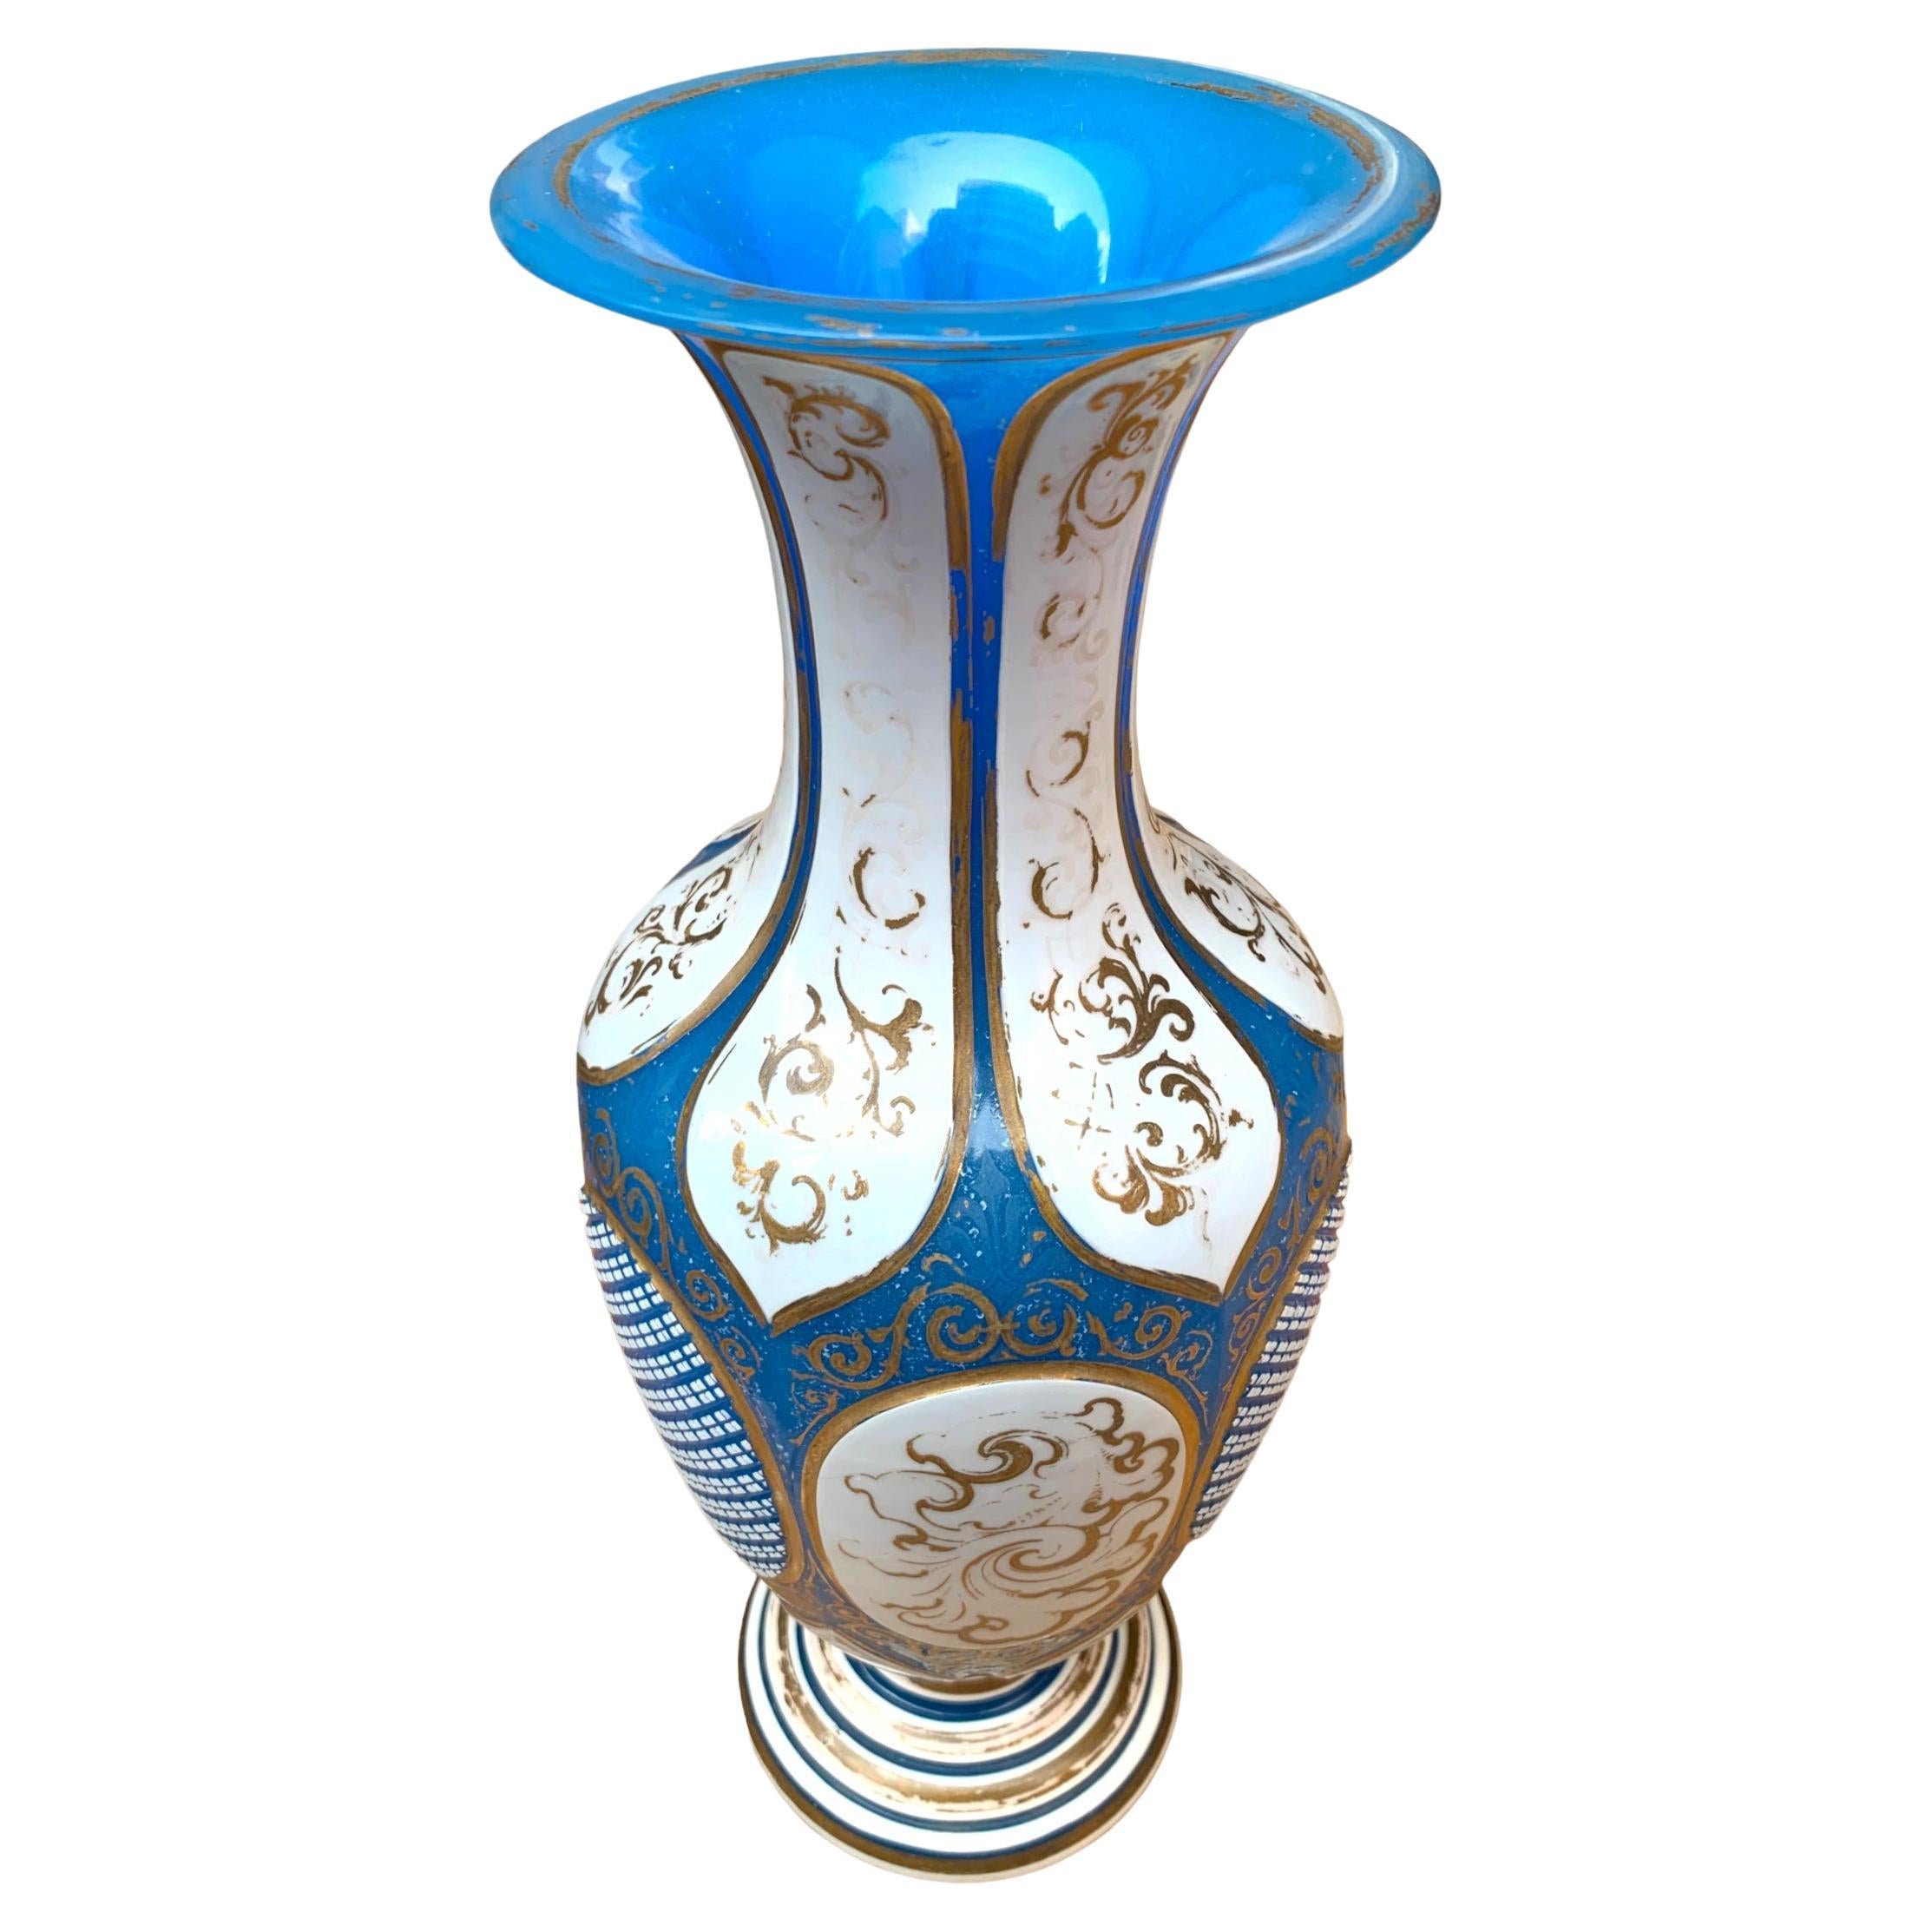 Antique Bohemian Enamelled Overlay Opaline Glass Vase, 19th Century In Good Condition For Sale In Rostock, MV